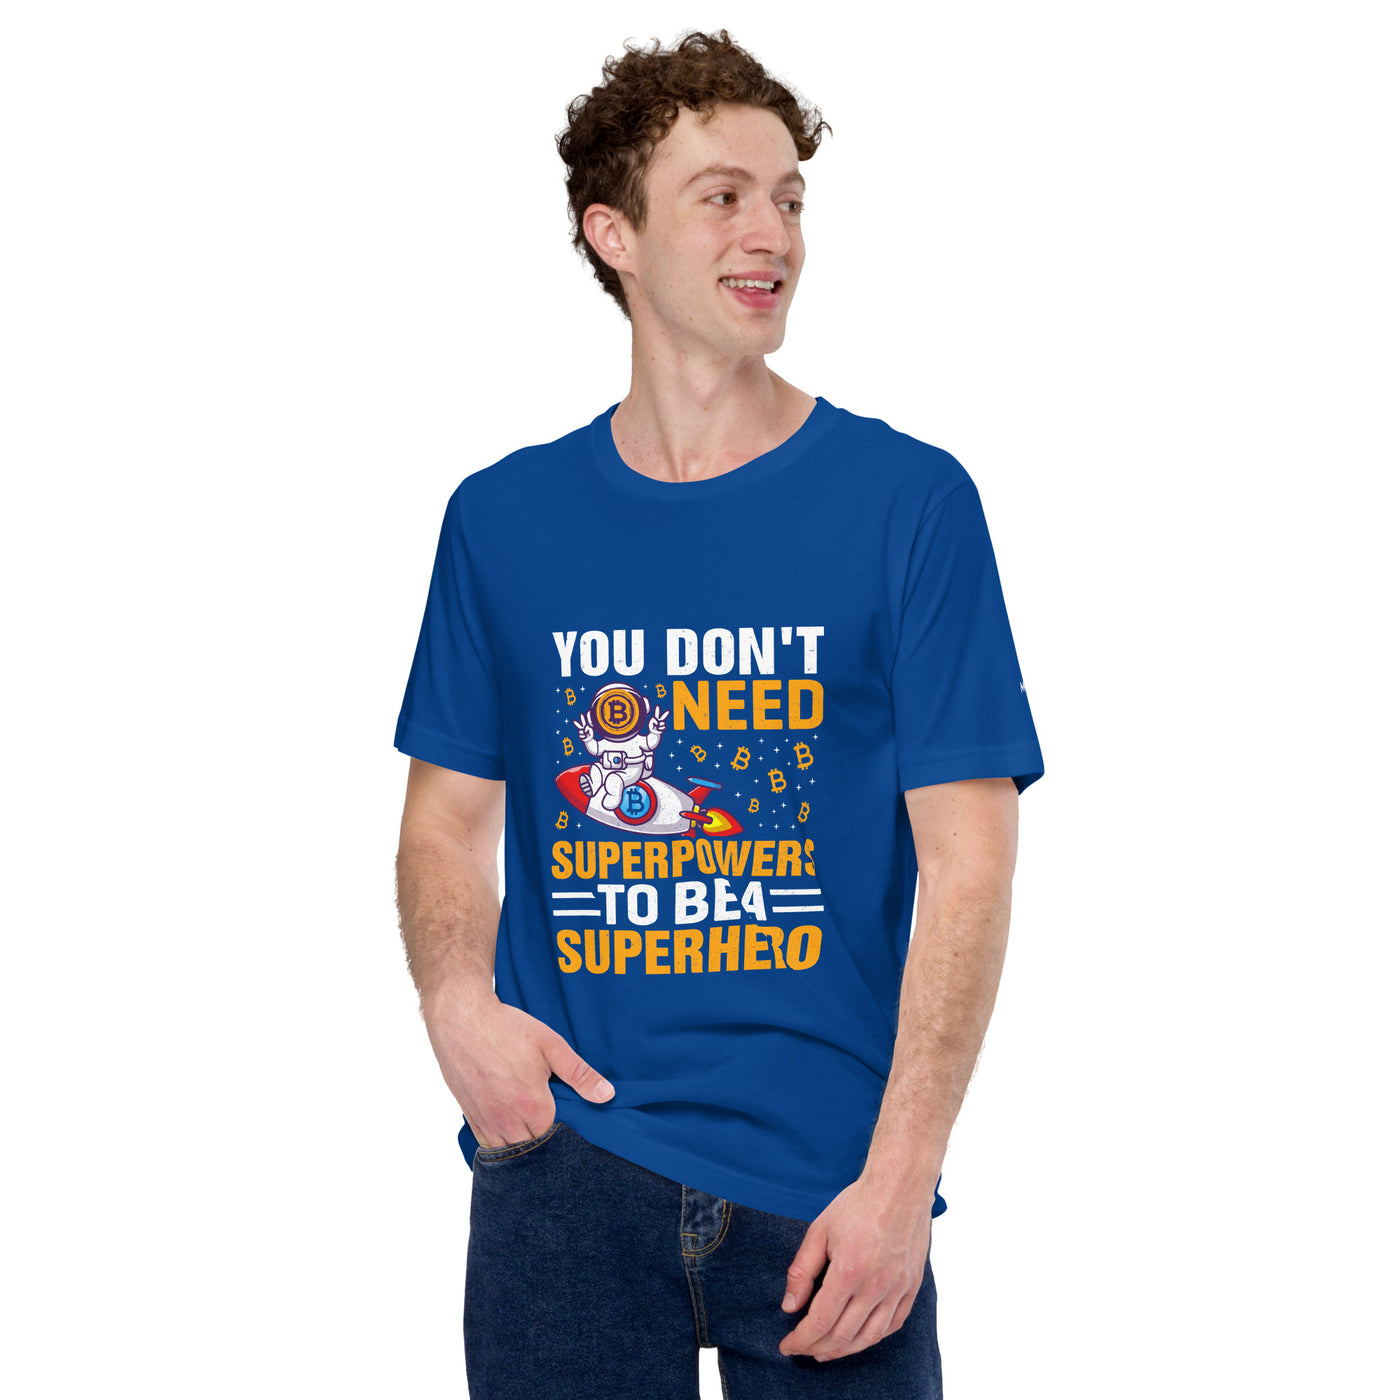 You don't Need superpower to be a Superhero - Unisex t-shirt